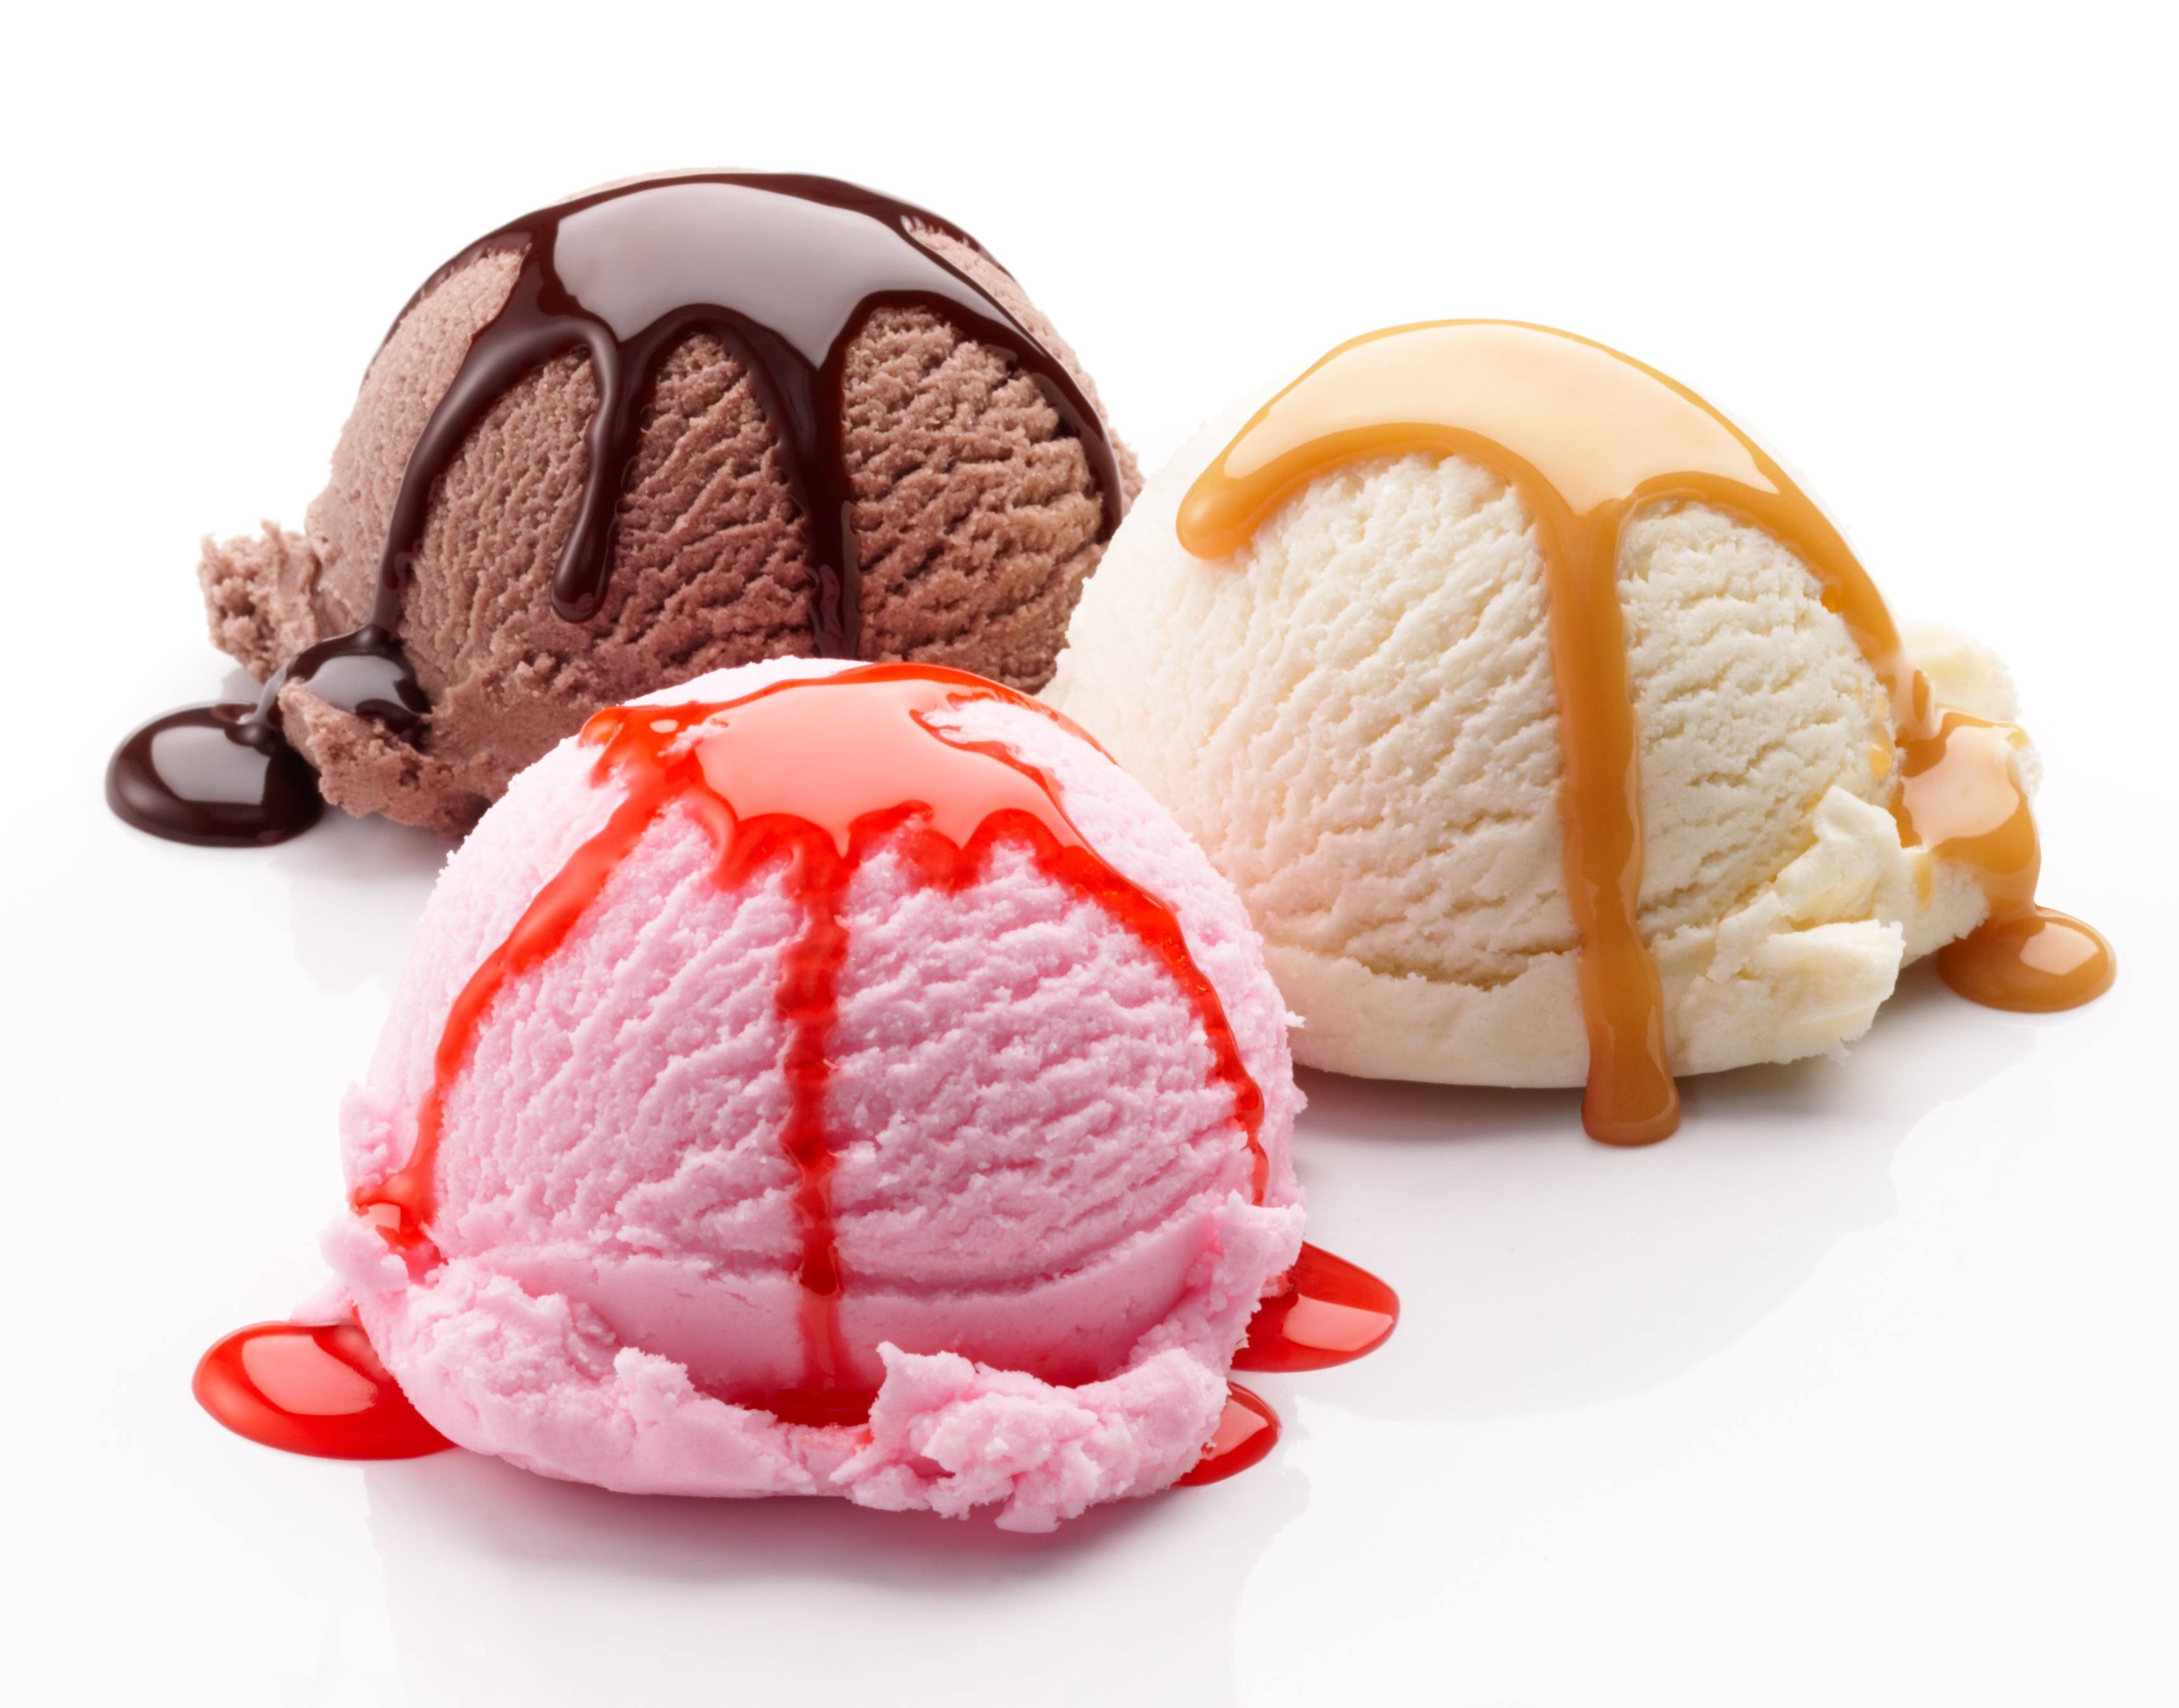  HD Quality Ice Cream Images Ice Cream Wallpapers HD Base